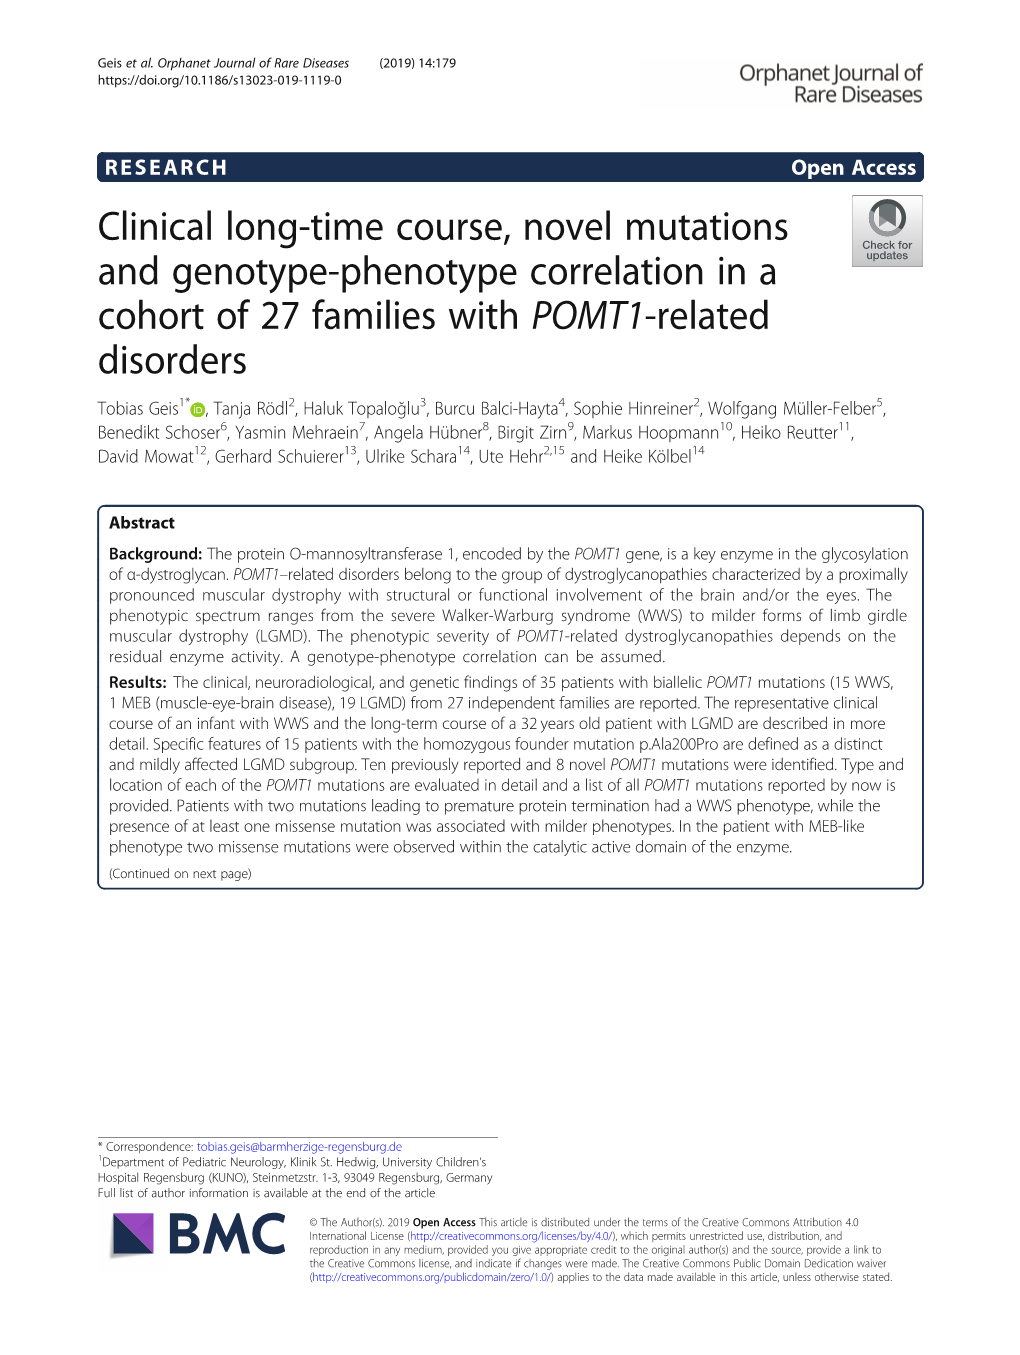 Clinical Long-Time Course, Novel Mutations and Genotype-Phenotype Correlation in a Cohort of 27 Families with POMT1-Related Diso